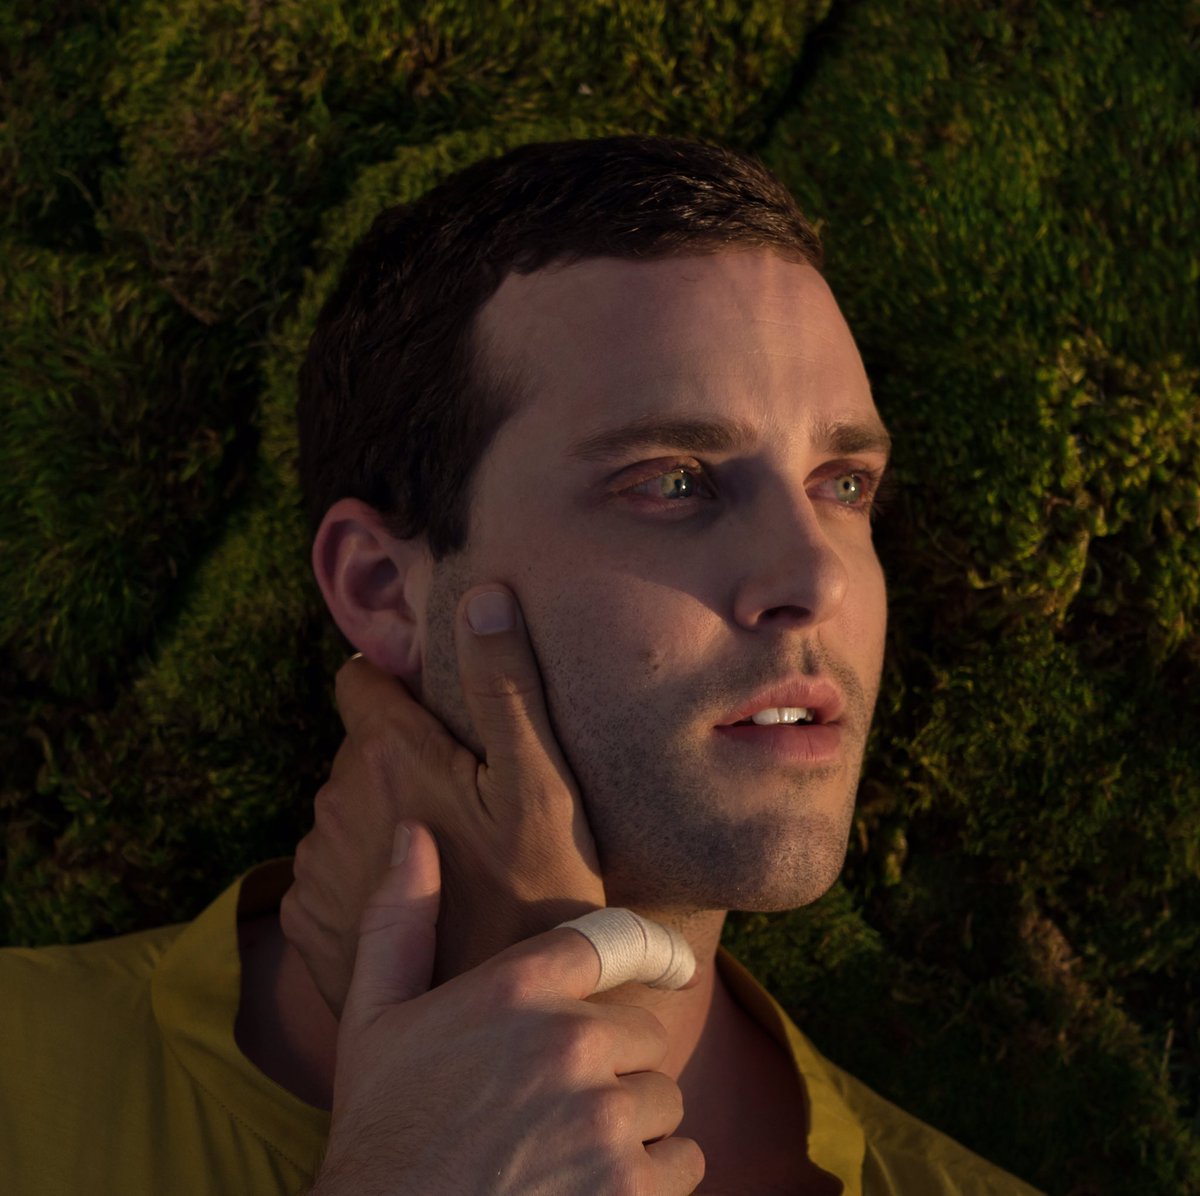 Baths Announces New Album <i></noscript>Romaplasm</i>, Releases “Yeoman”” title=”baths-romaplasm-1506005380″ data-original-id=”258936″ data-adjusted-id=”258936″ class=”sm_size_full_width sm_alignment_center ” data-image-source=”free_stock” />
<p><strong>Baths, <em>Romaplasm</em> track list:</strong><br />
1. “Yeoman”<br />
2. “Extrasolar”<br />
3. “Abscond”<br />
4. “Human Bog”<br />
5. “Adam Copies”<br />
6. “Lev”<br />
7. “I Form”<br />
8. “Out”<br />
9. “Superstructure”<br />
10. “Wilt”<br />
11. “Coitus”<br />
12. “Broadback”</p>
</div>
</div>
</div>
</div>
</div>
</section>
<section data-particle_enable=